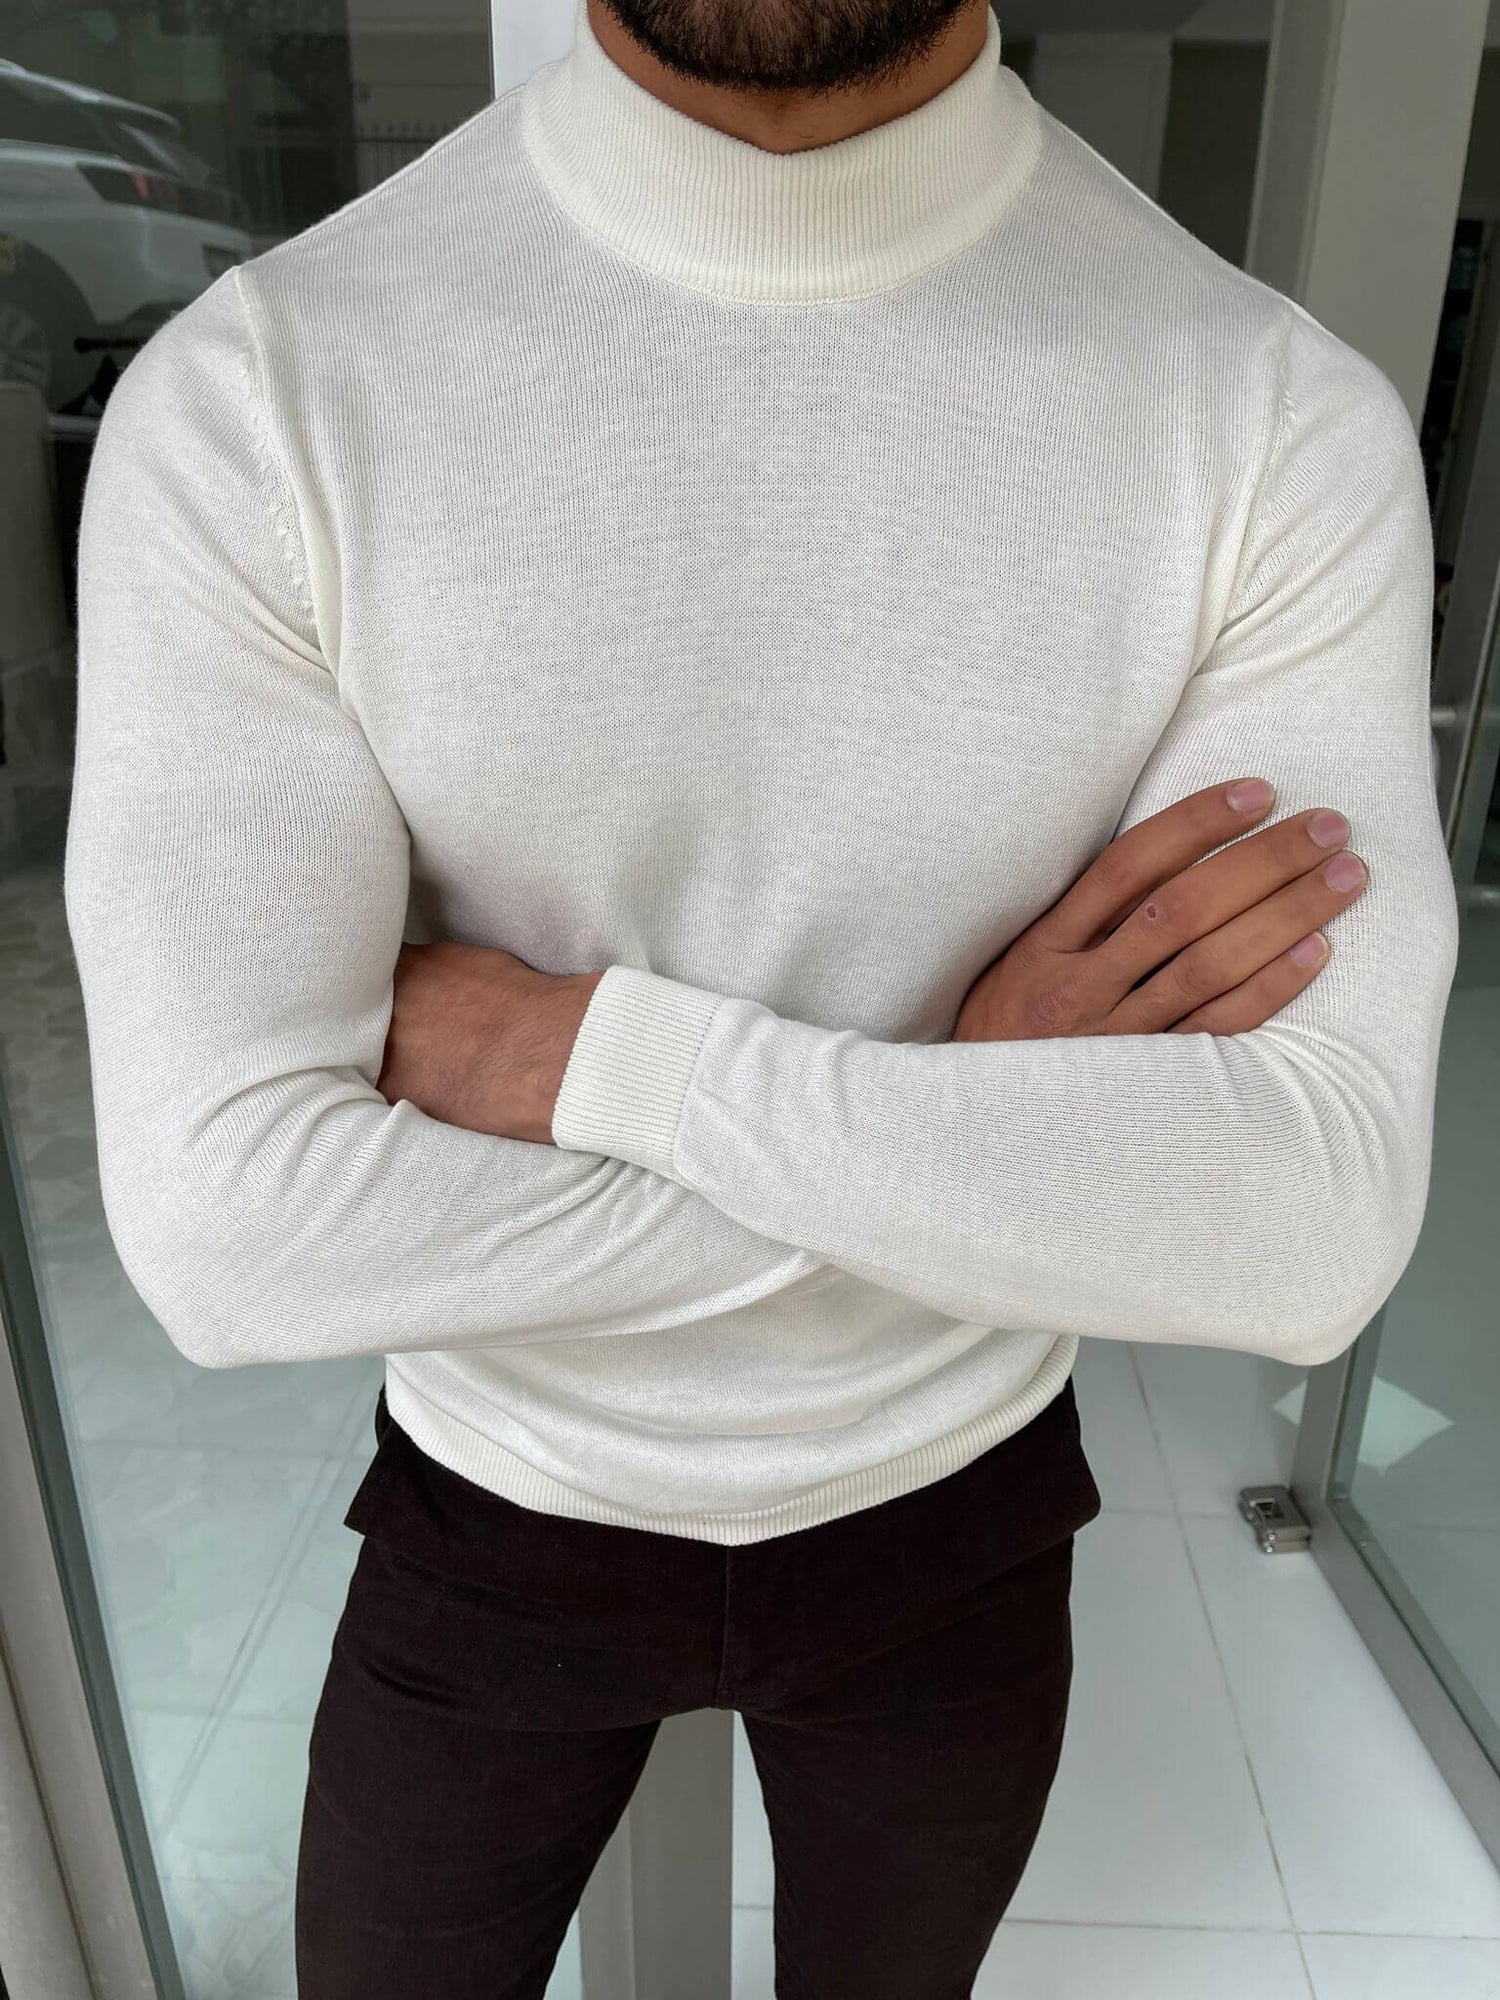 "An elegant Hollo Ecru Turtleneck, a soft and cozy turtleneck sweater in a neutral ecru color, perfect for cool weather and versatile for any occasion